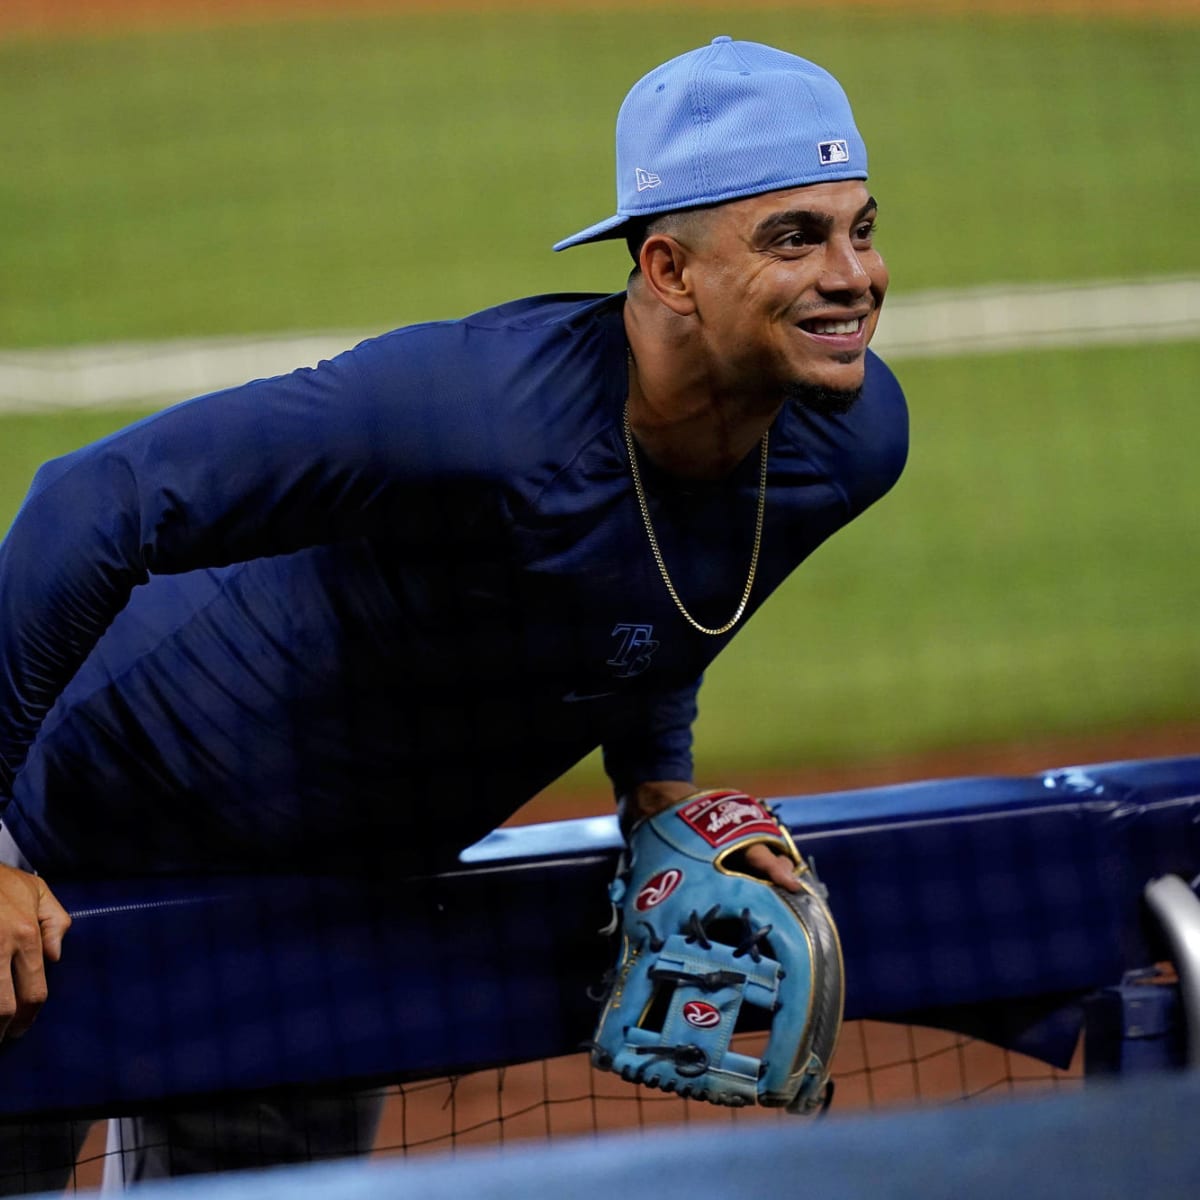 Willy Adames' mantra of thankfulness